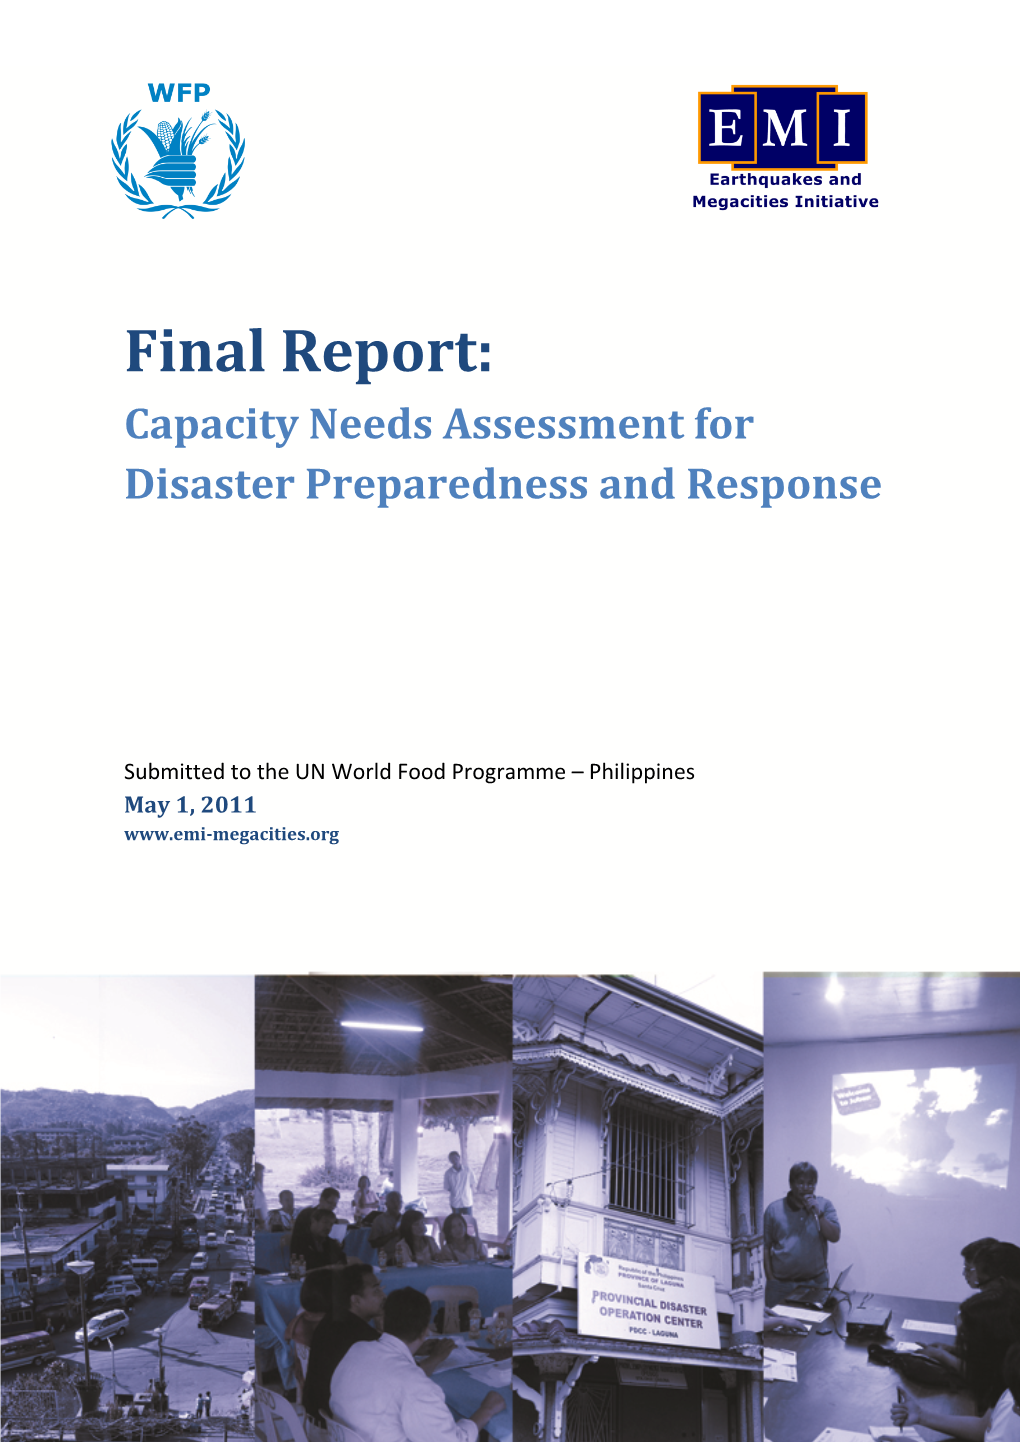 Final Report: Capacity Needs Assessment for Disaster Preparedness and Response